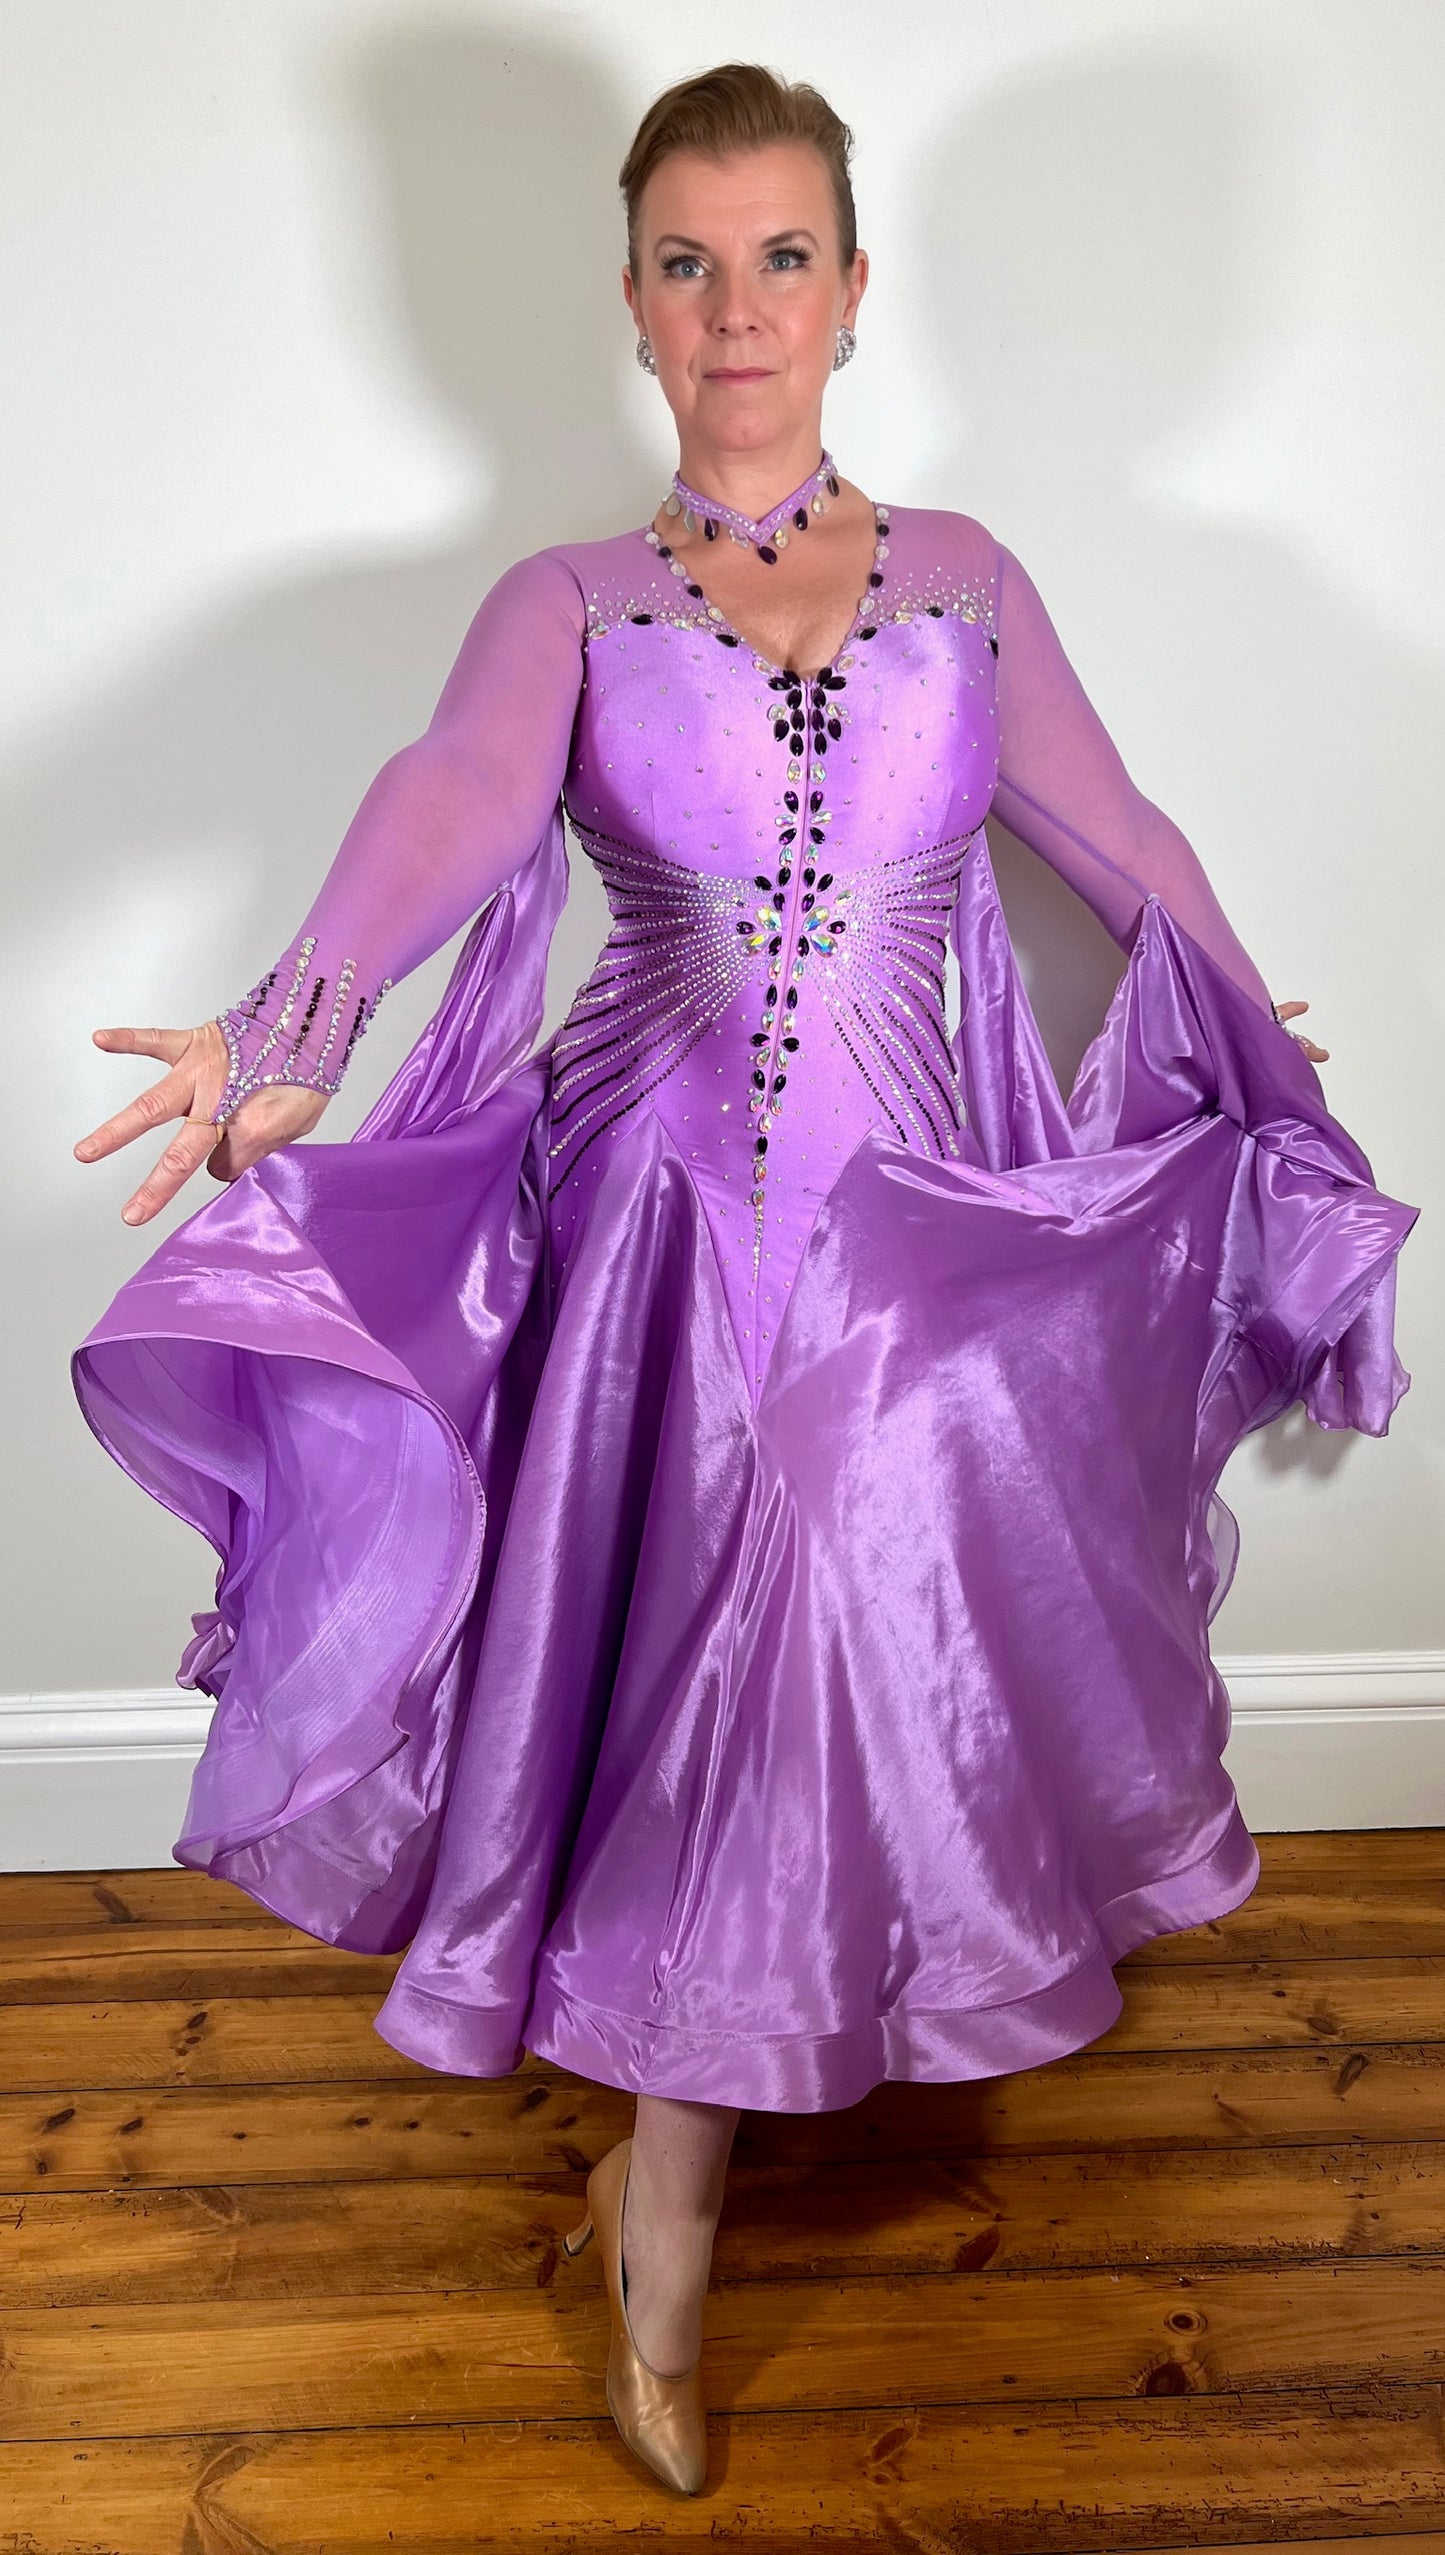 057 Lilac Dream Competition Ballroom Dance Dress. Comes with Detachable floats. High mesh on flesh Lycra back. Stoned in Purple velvet and AB